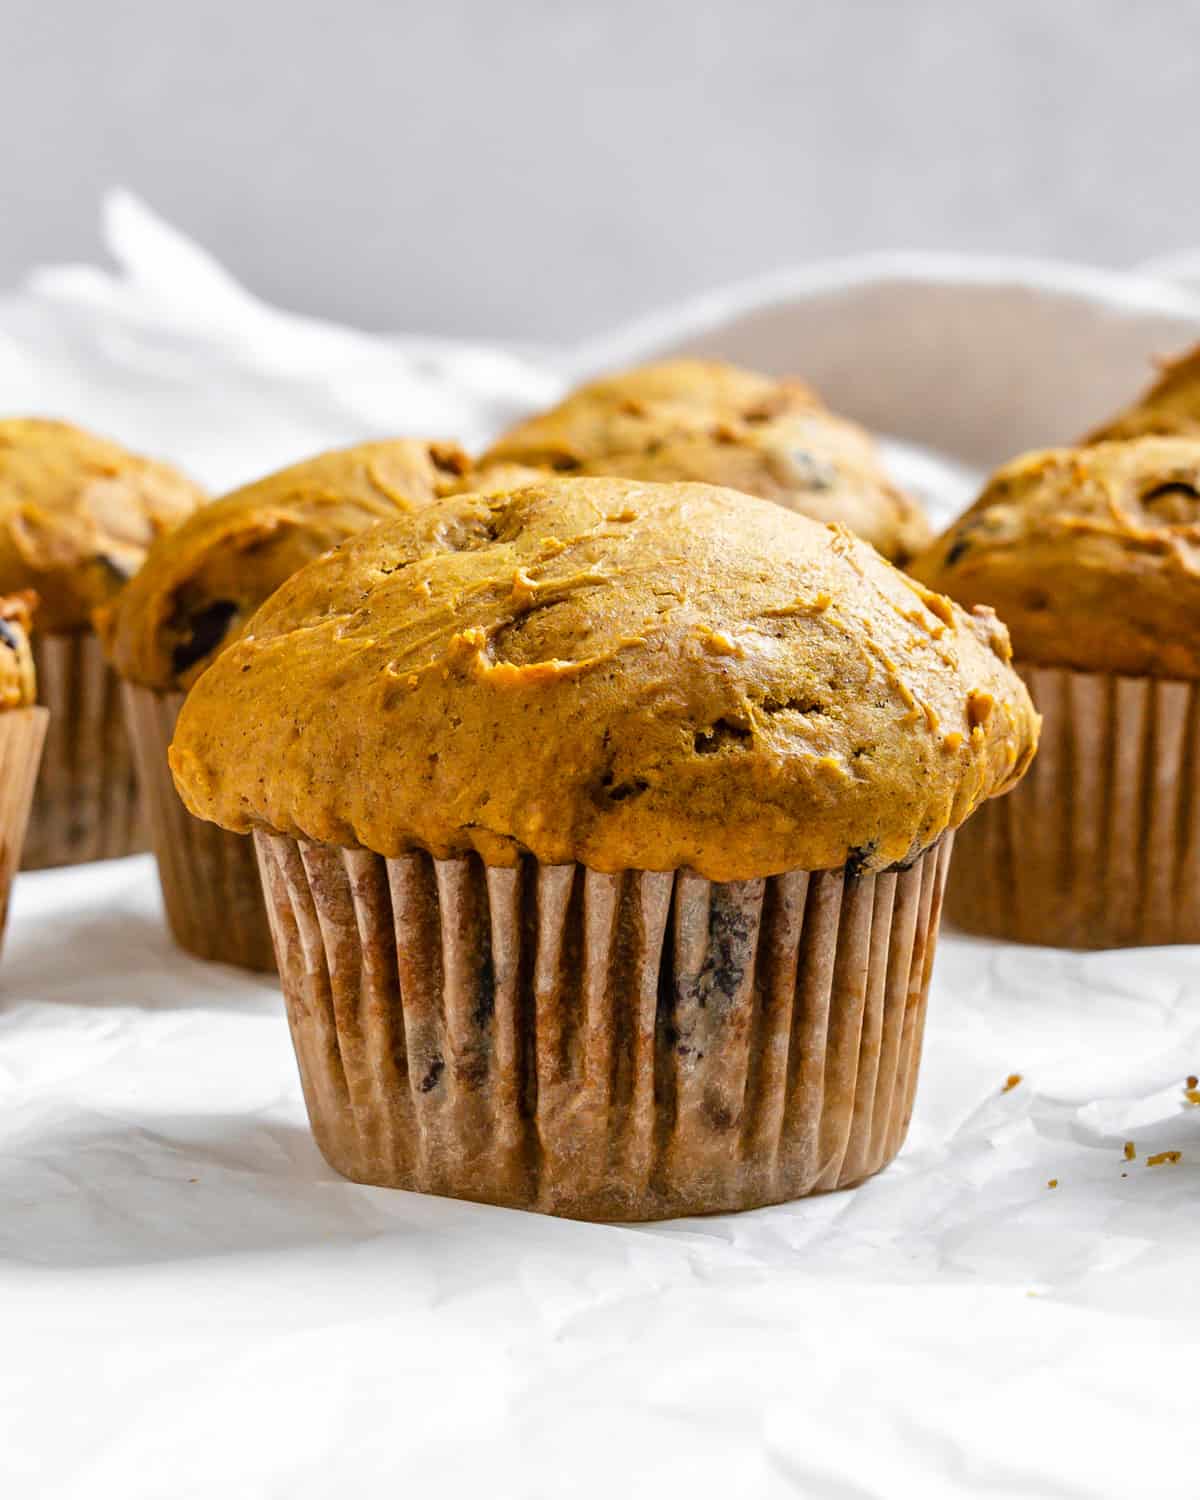 completed Vegan Pumpkin Chocolate Chip Muffins on a white surface